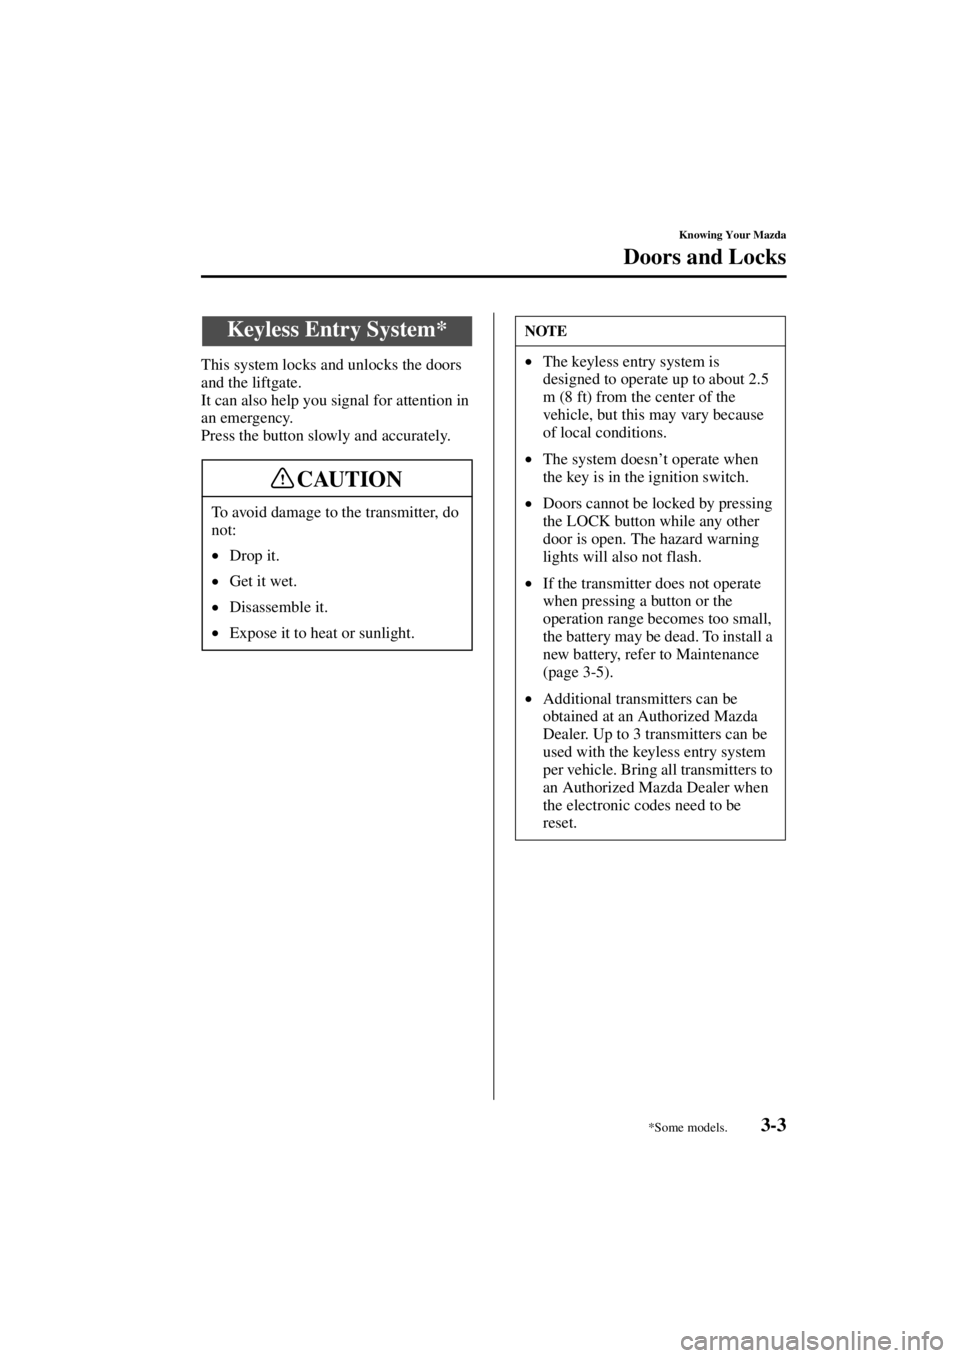 MAZDA MODEL 3 5-DOOR 2004 Manual PDF 3-3
Knowing Your Mazda
Doors and Locks
Form No. 8S18-EA-03I
This system locks and unlocks the doors 
and the liftgate.
It can also help you signal for attention in 
an emergency.
Press the button slow